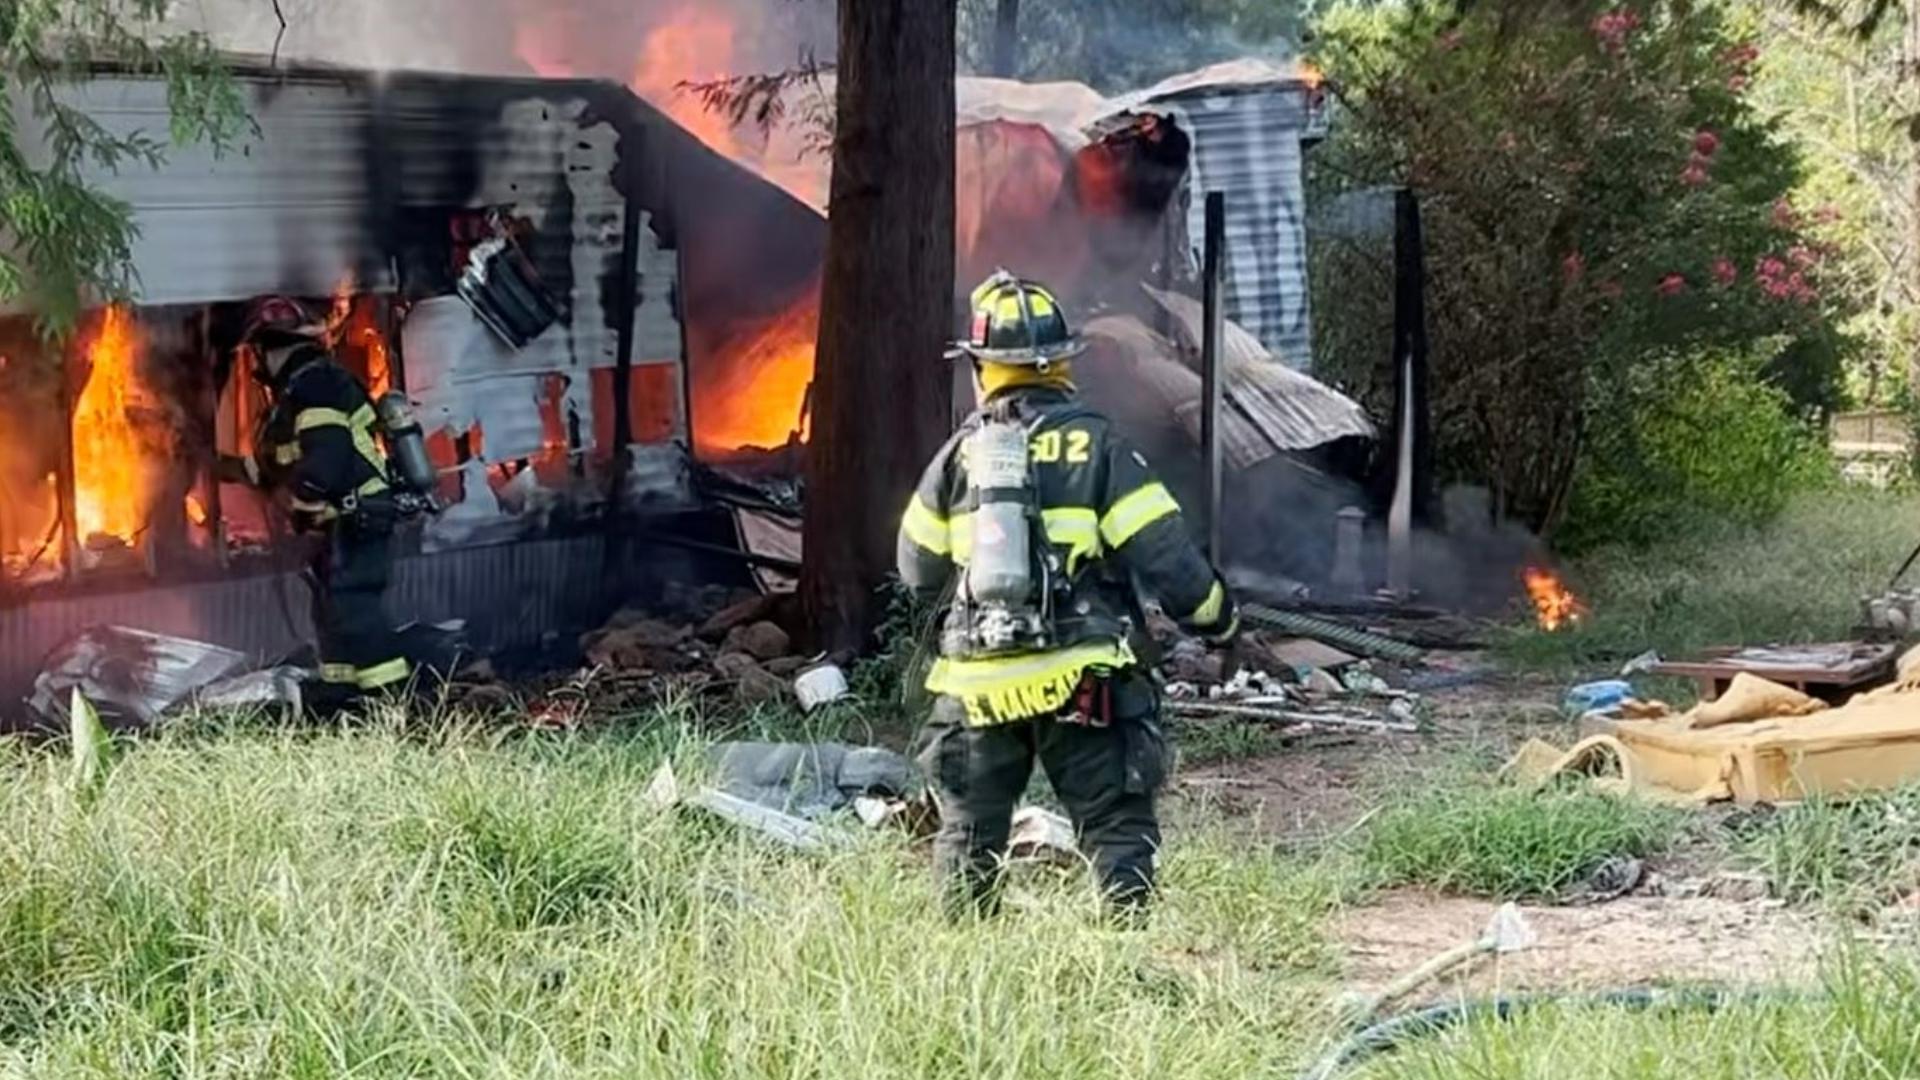 Crews respond to mobile home fire in Winona